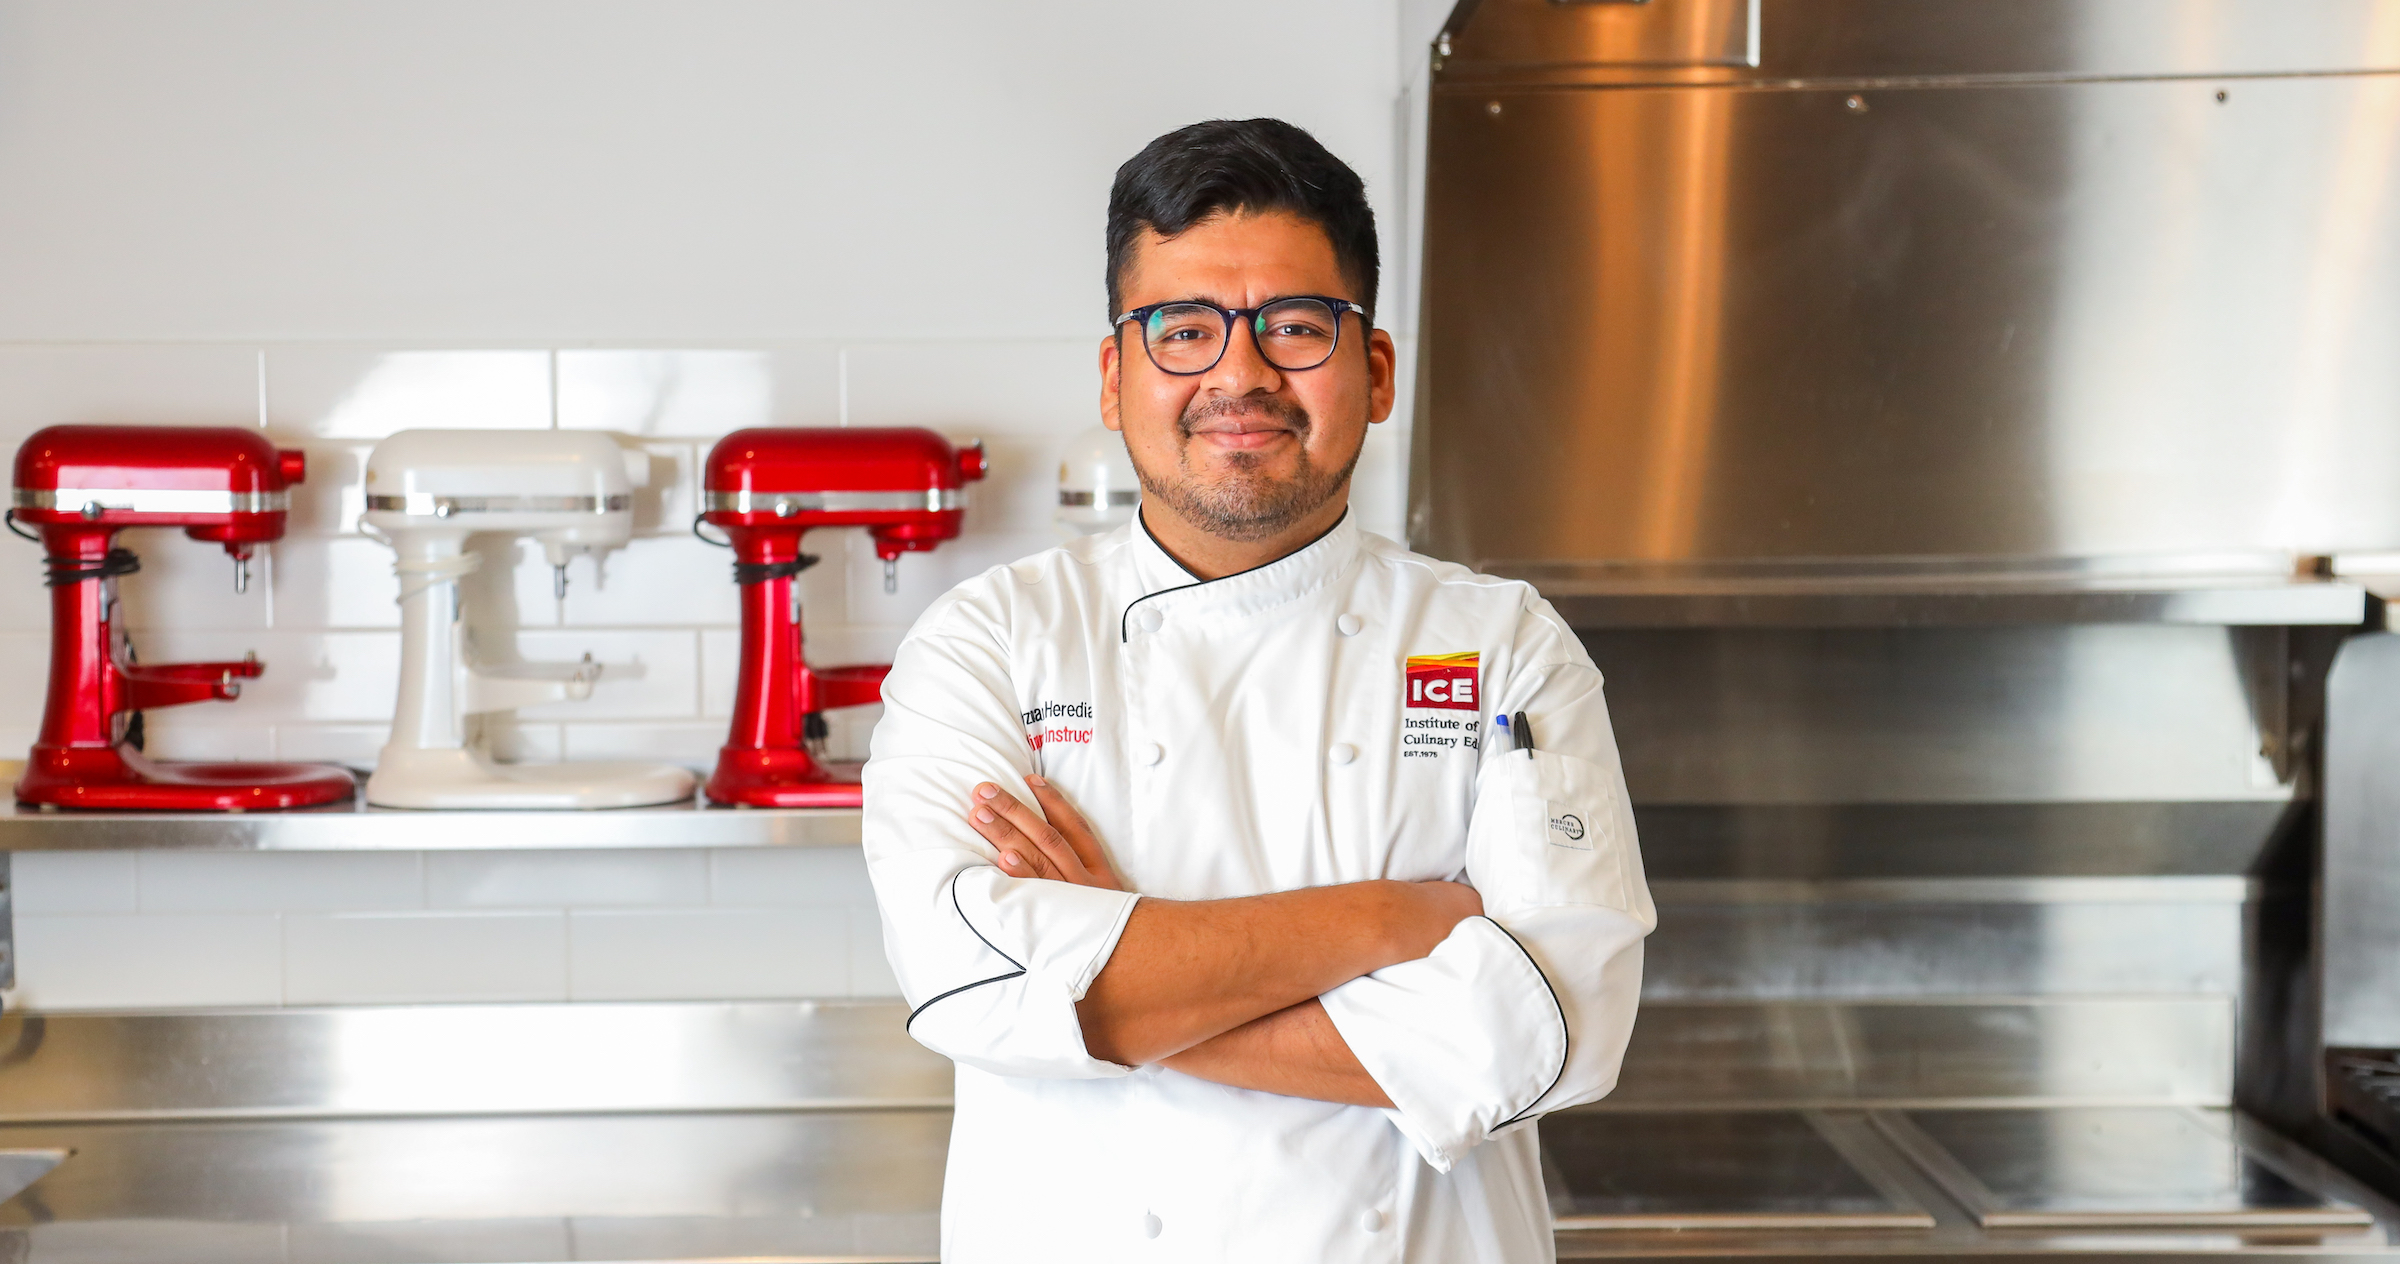 Chef-Instructor Ozmar Heredia stands in a kitchen smiling